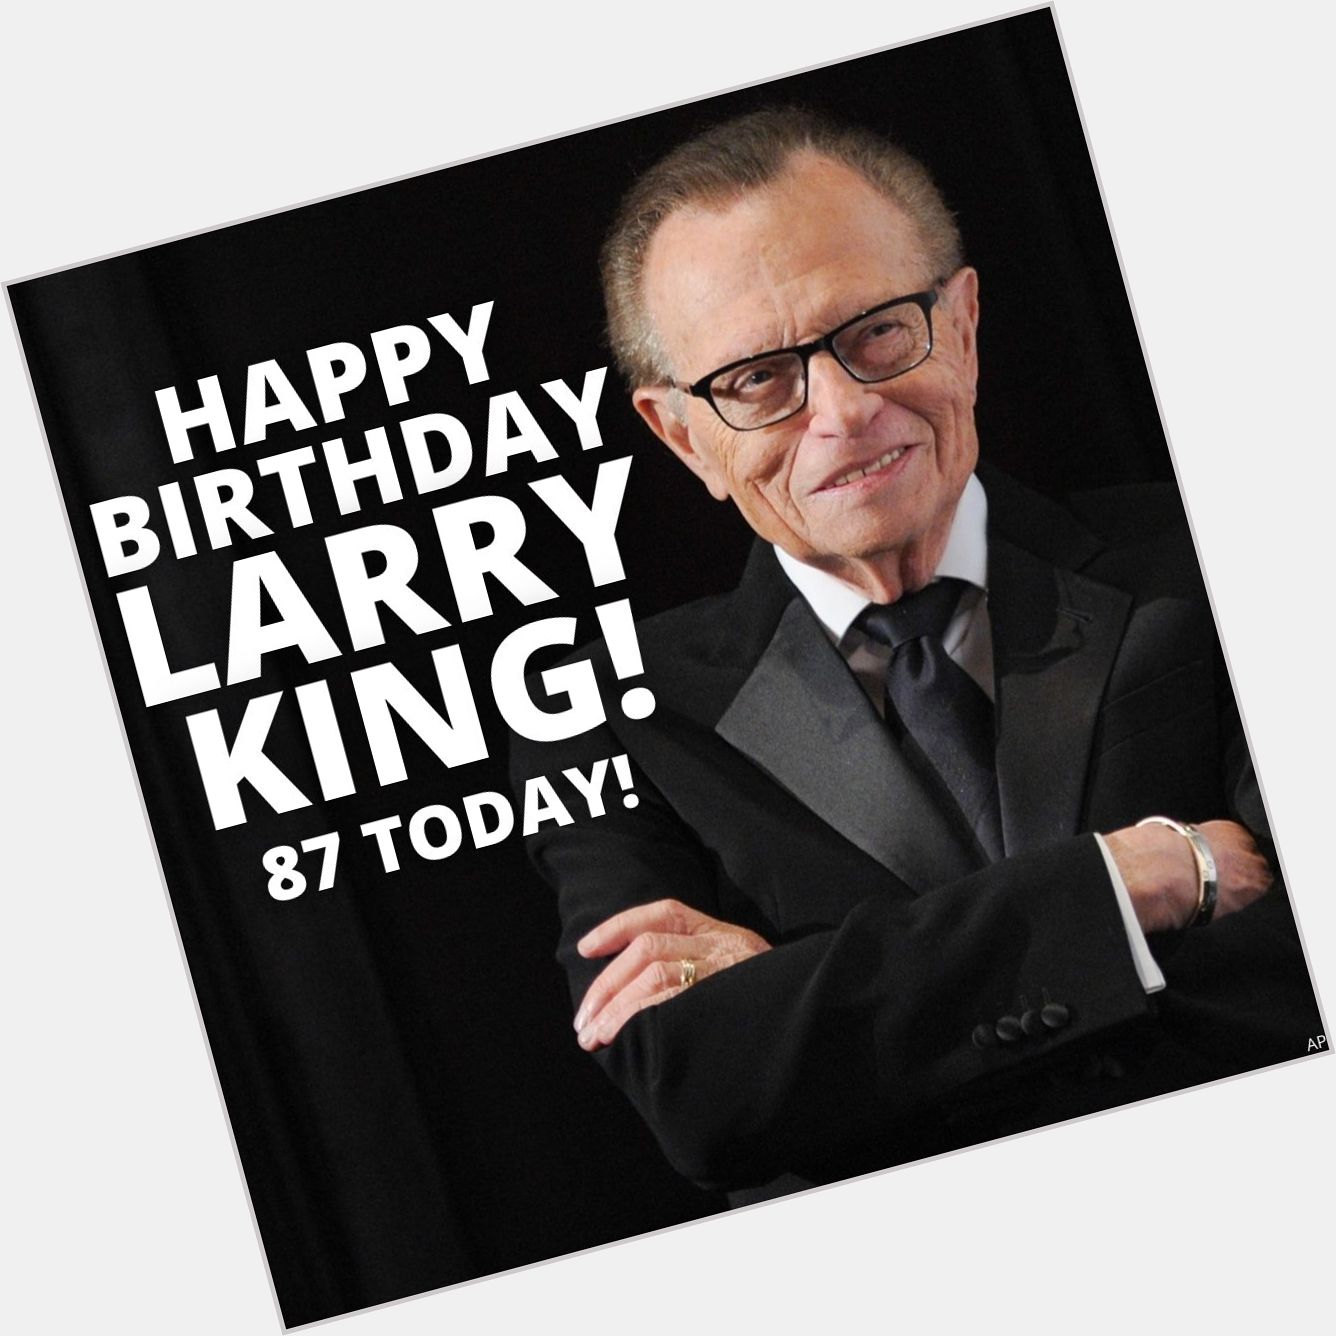 Happy Birthday Larry King!

The TV and radio host turns 87 today. 